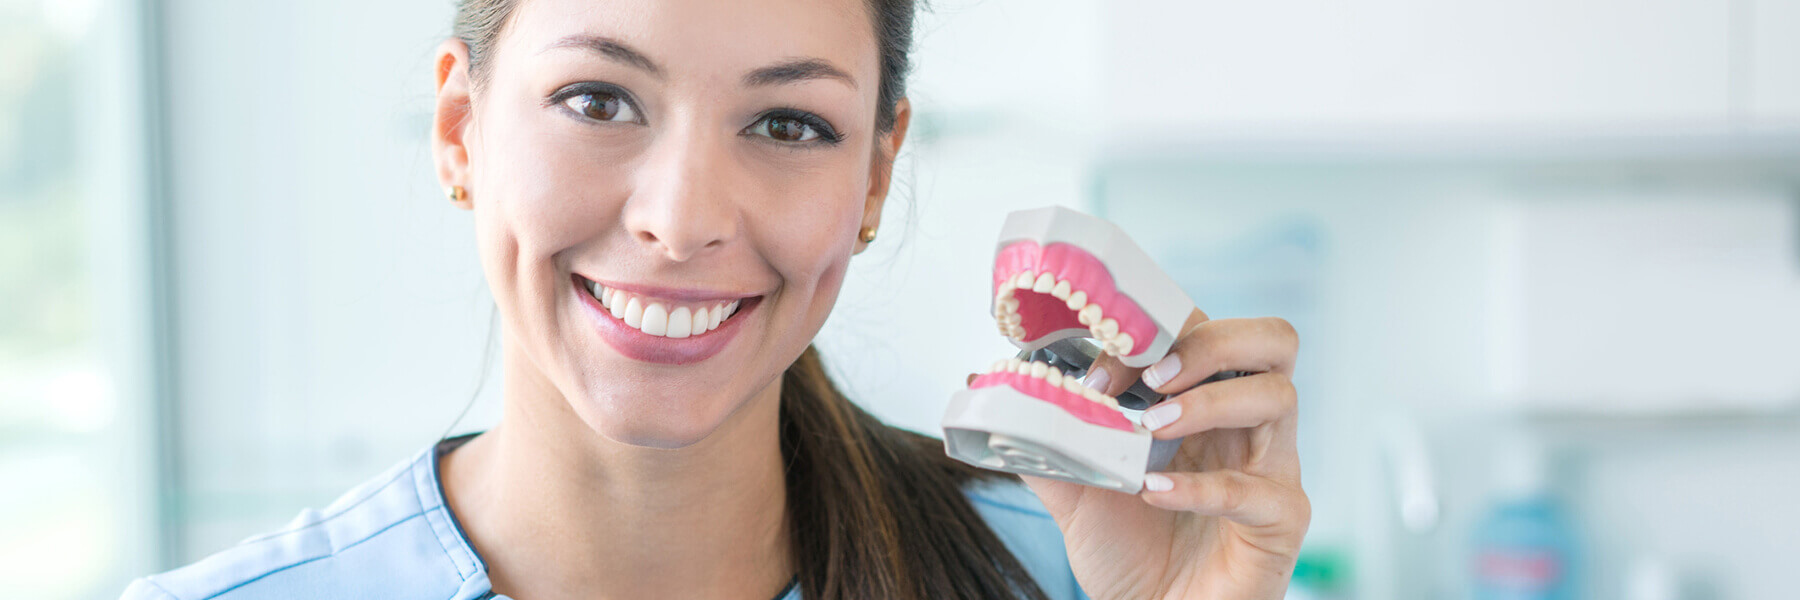 Buying or Replacing a Denture Which Is Better